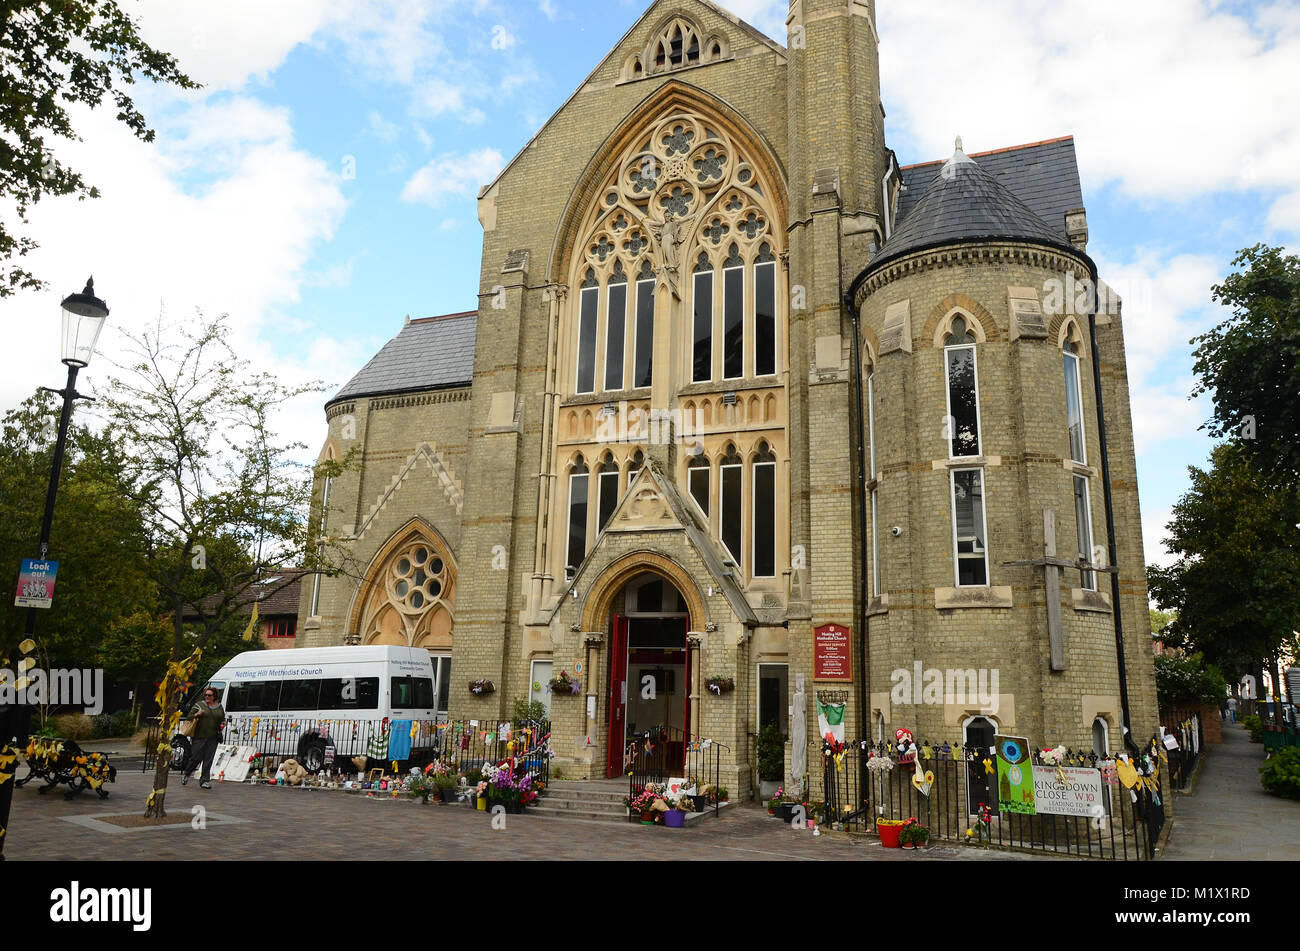 notting hill Methodist church,  Grenfell tower disaster,  community support Stock Photo